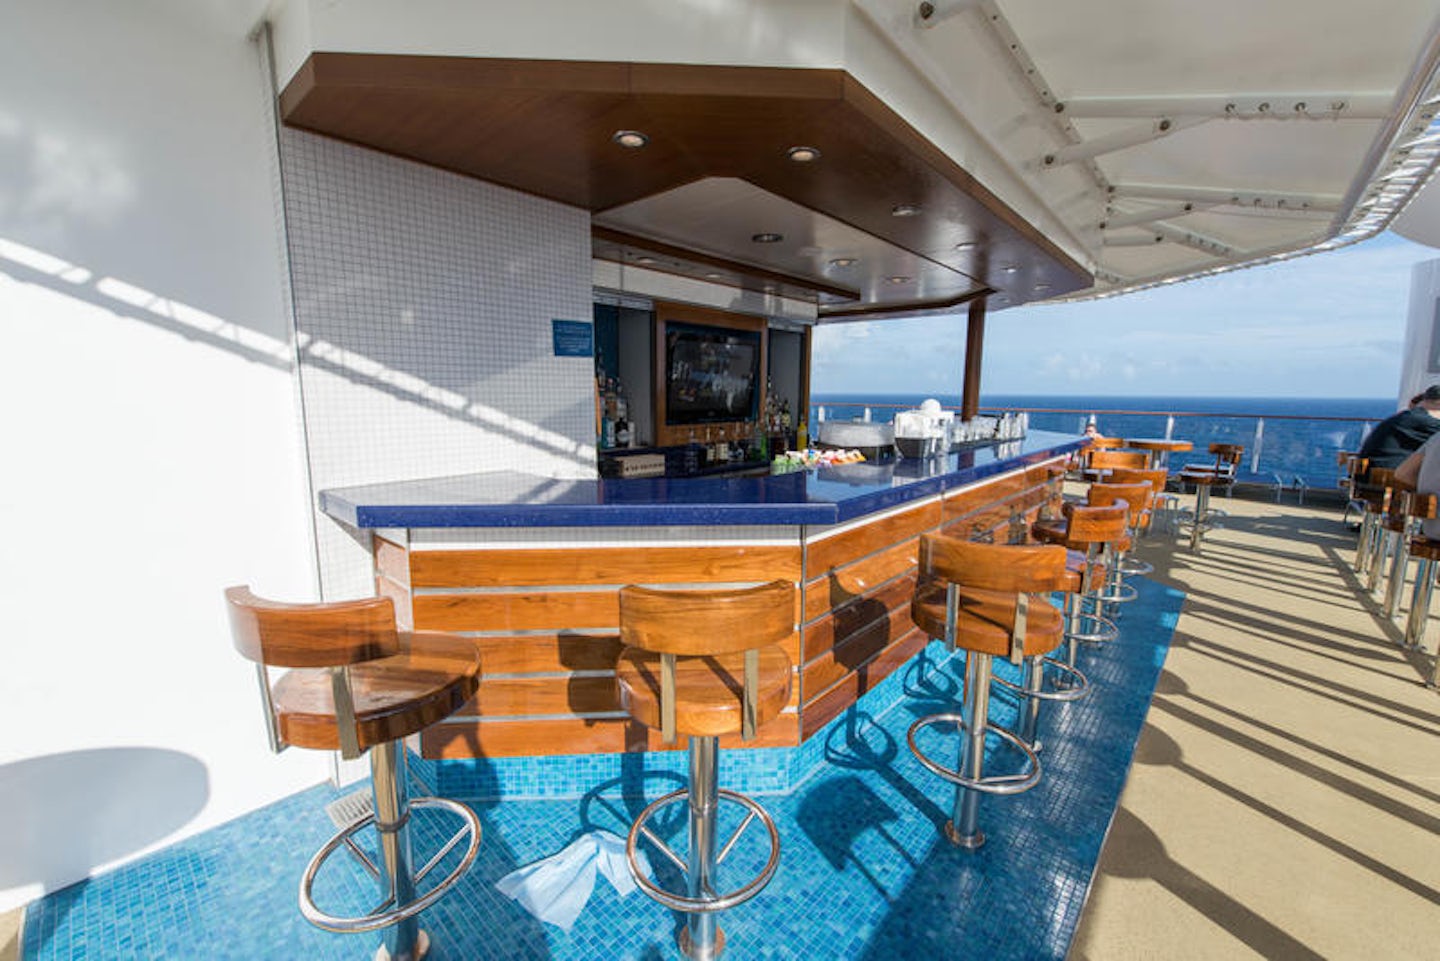 Waves Deck 17 (Smoking Permitted) on Norwegian Escape